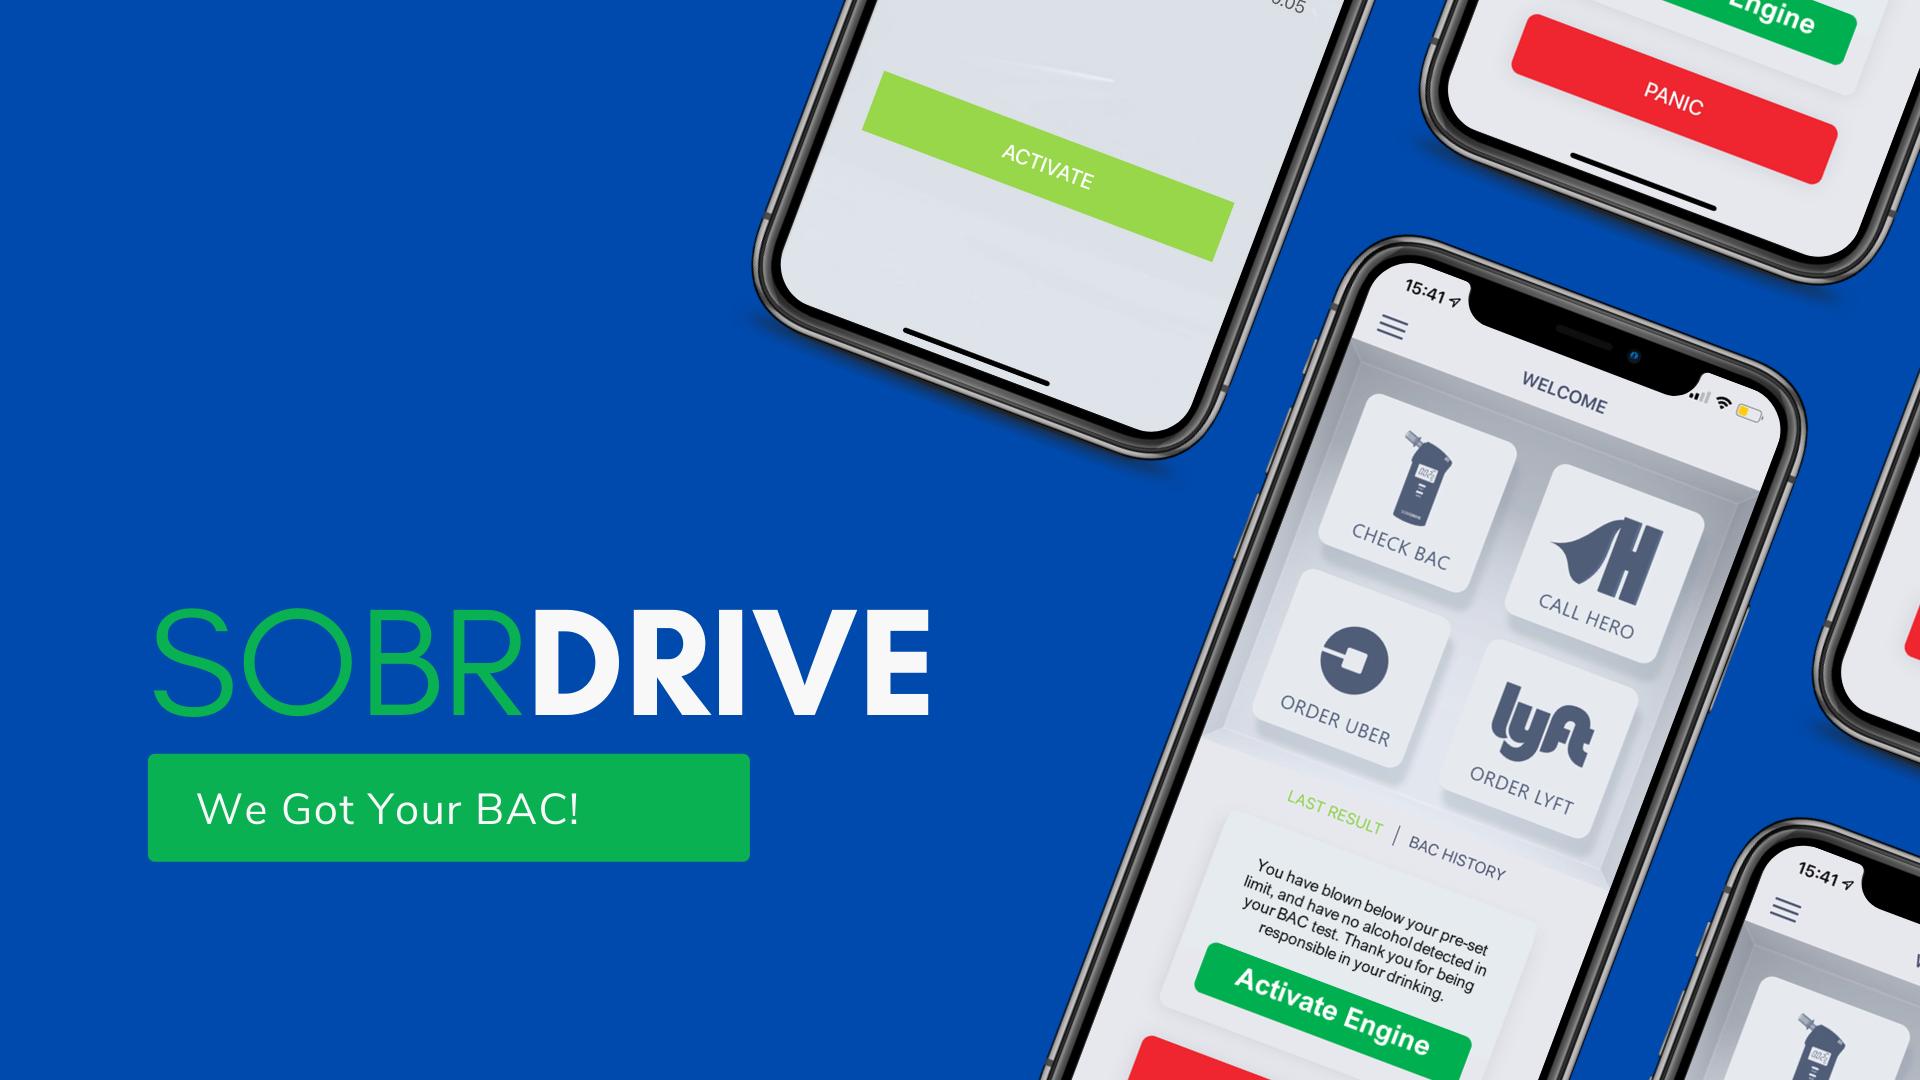 Load video: SOBRDRIVE is the first mobile application that makes sobriety a shared experience – helping to enhance personal responsibility and decrease drunk driving,